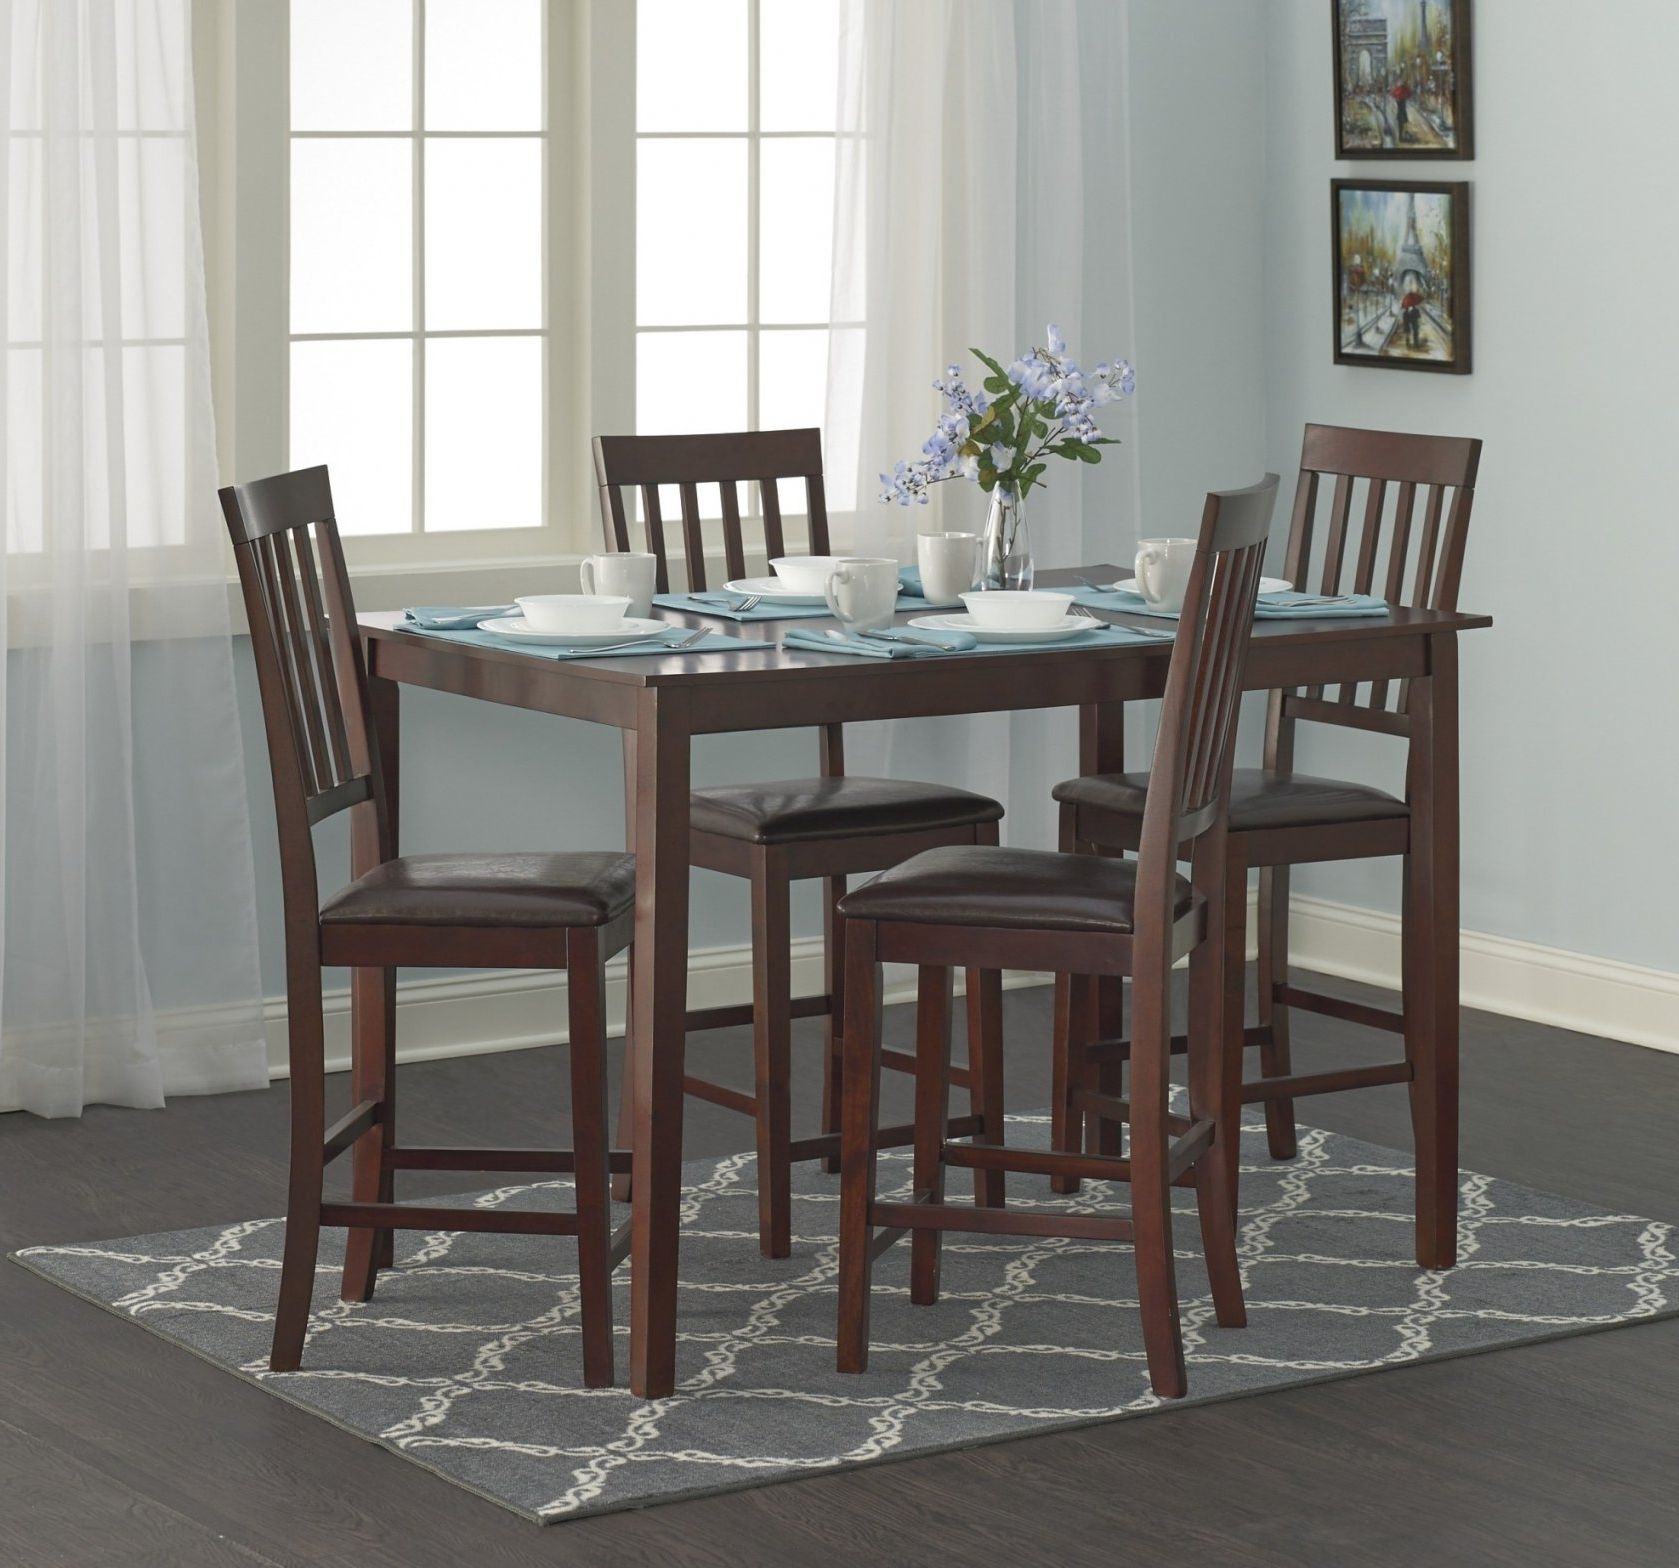 1. Kmart Dining Chair Kmart Table Set And Good Dining Room Ideas With Trendy Cora 5 Piece Dining Sets (Photo 6 of 25)